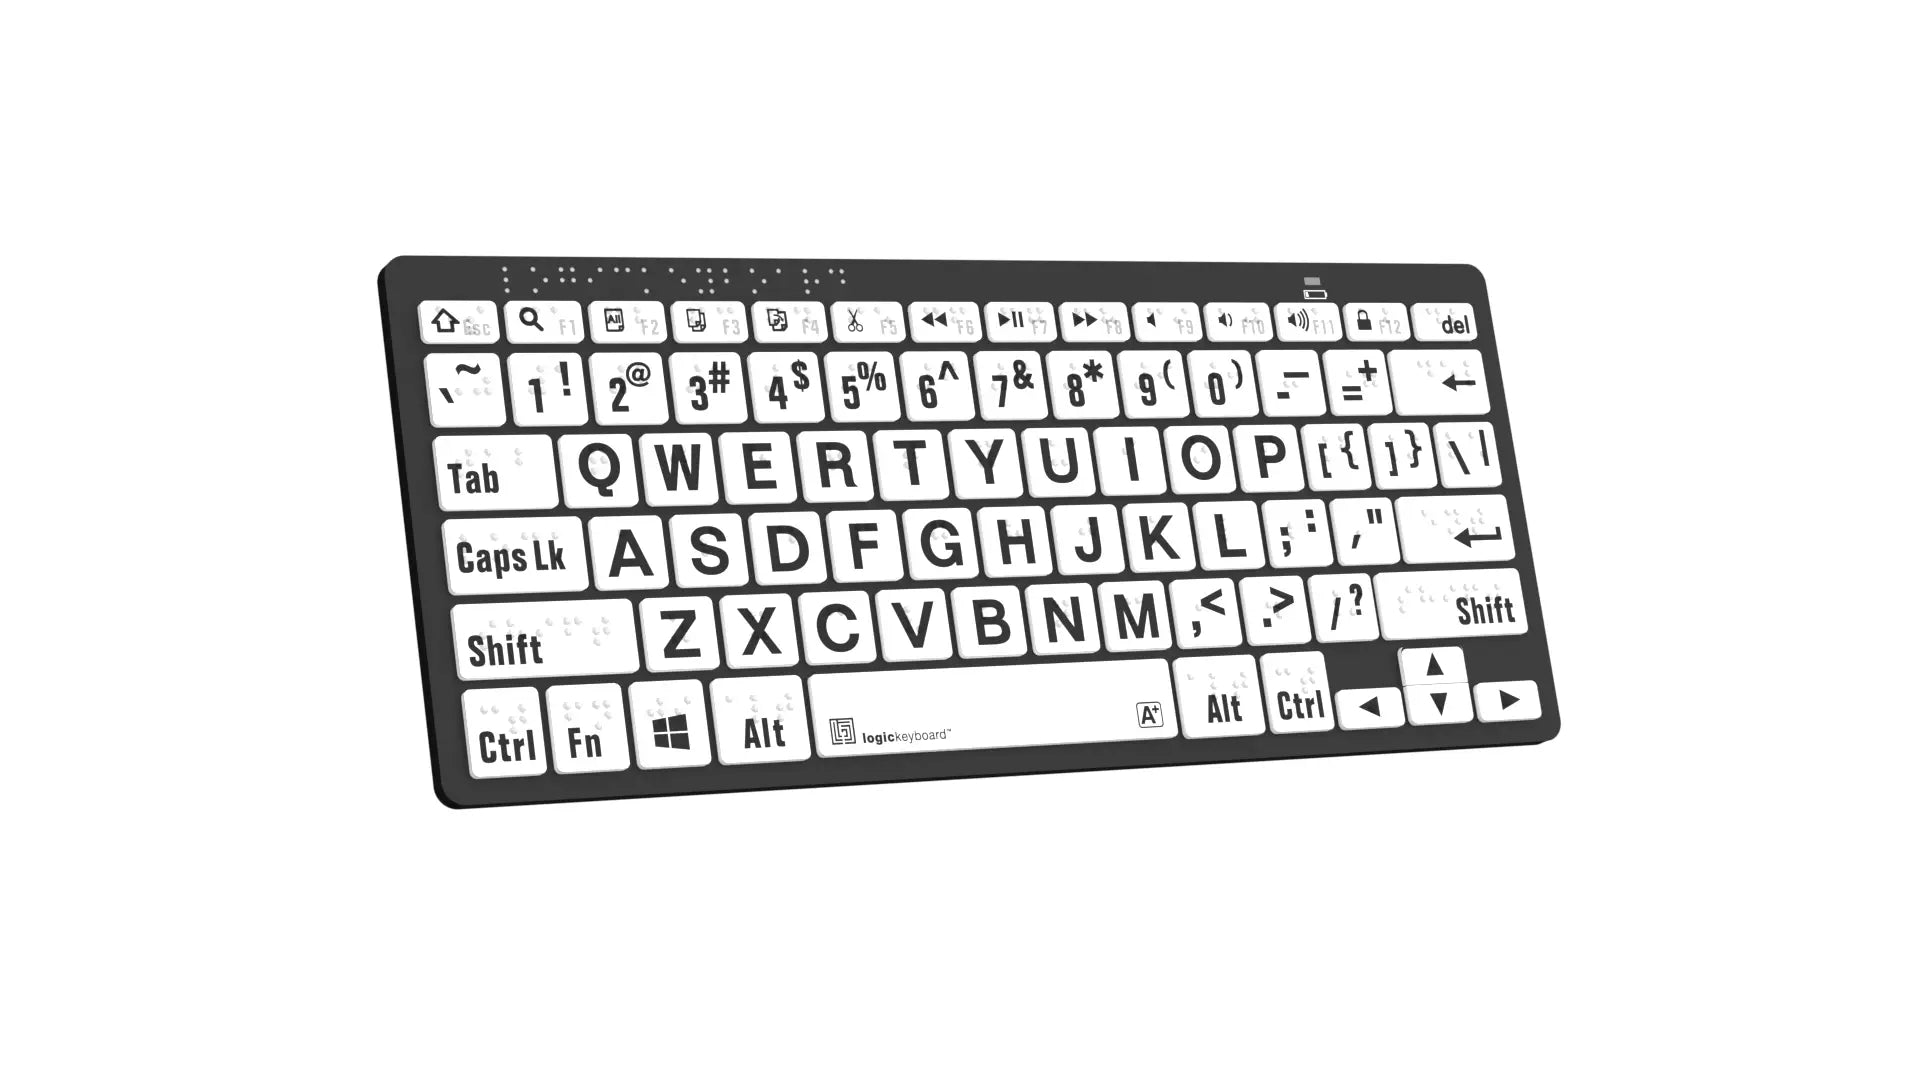 Left angle image of the Braille & LargePrint Black on White Bluetooth Keyboard for PC from LogicKeyboard.